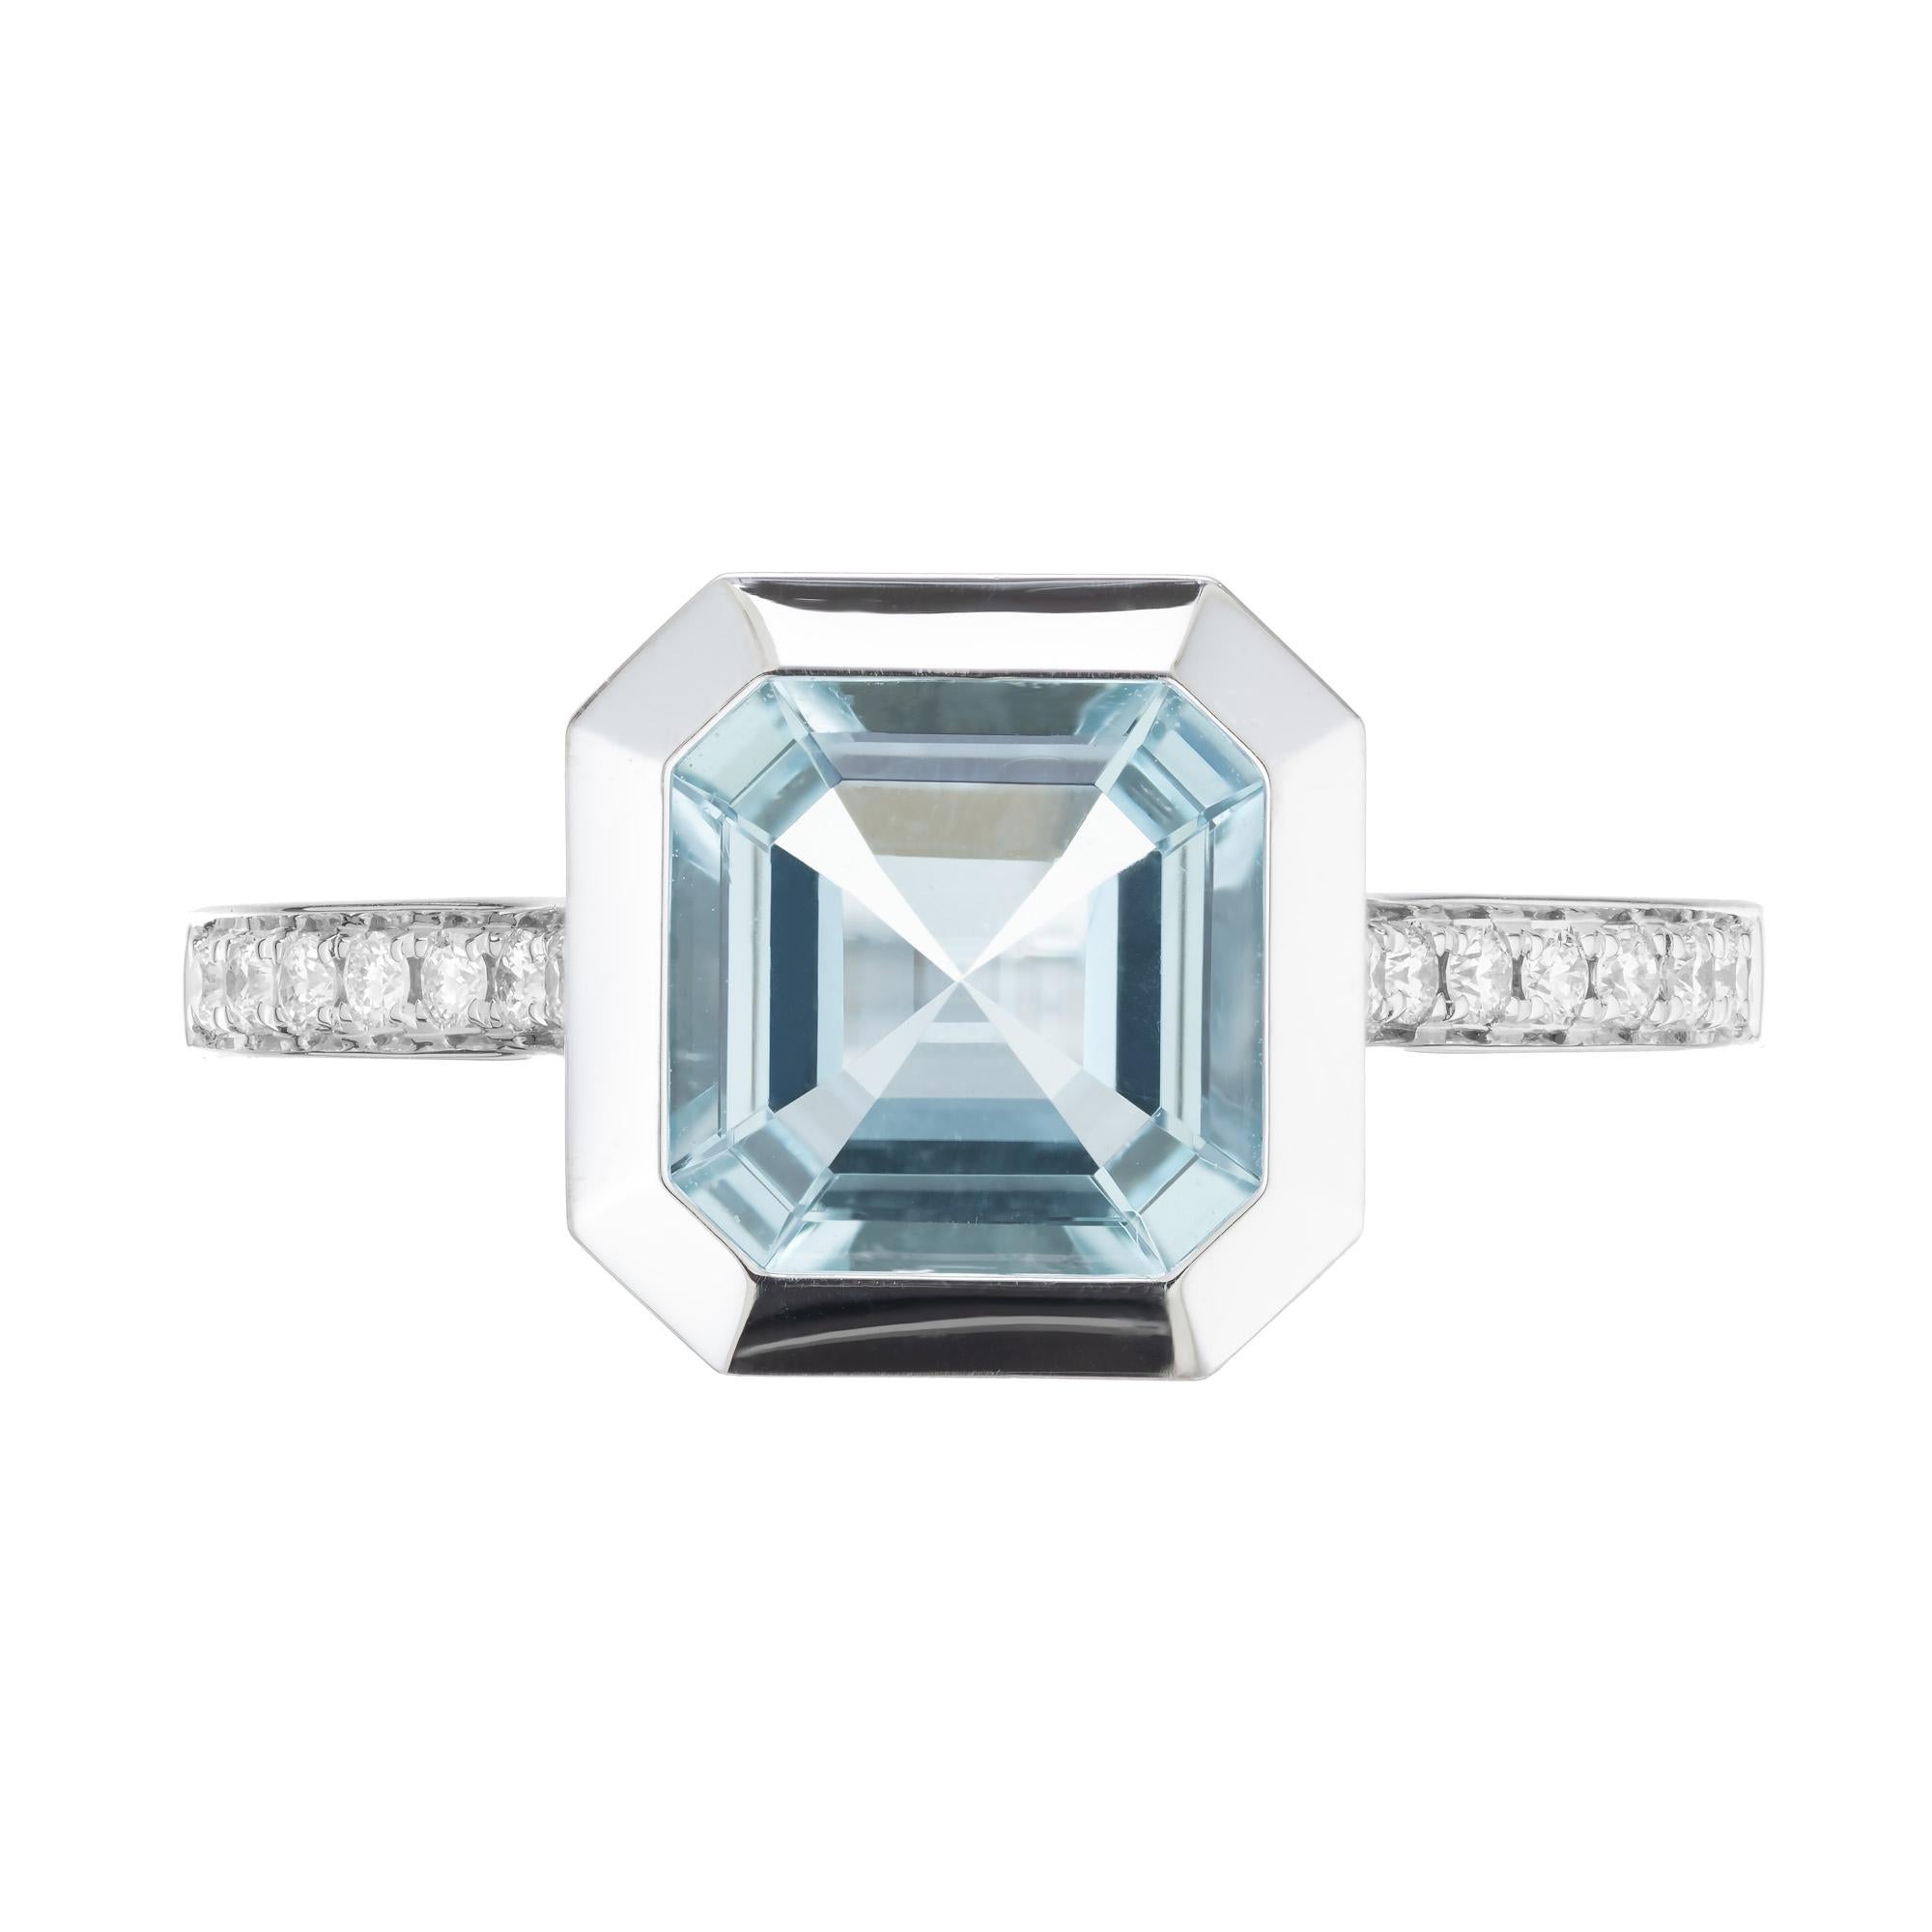 Bright, clear blue aquamarine and diamond ring. 1.80ct eight sided bezel set aquamarine in a 14k white gold setting designed to show off the natural beauty of the stone. The stone is accented with 14 round brilliant cut diamonds along the shoulders.